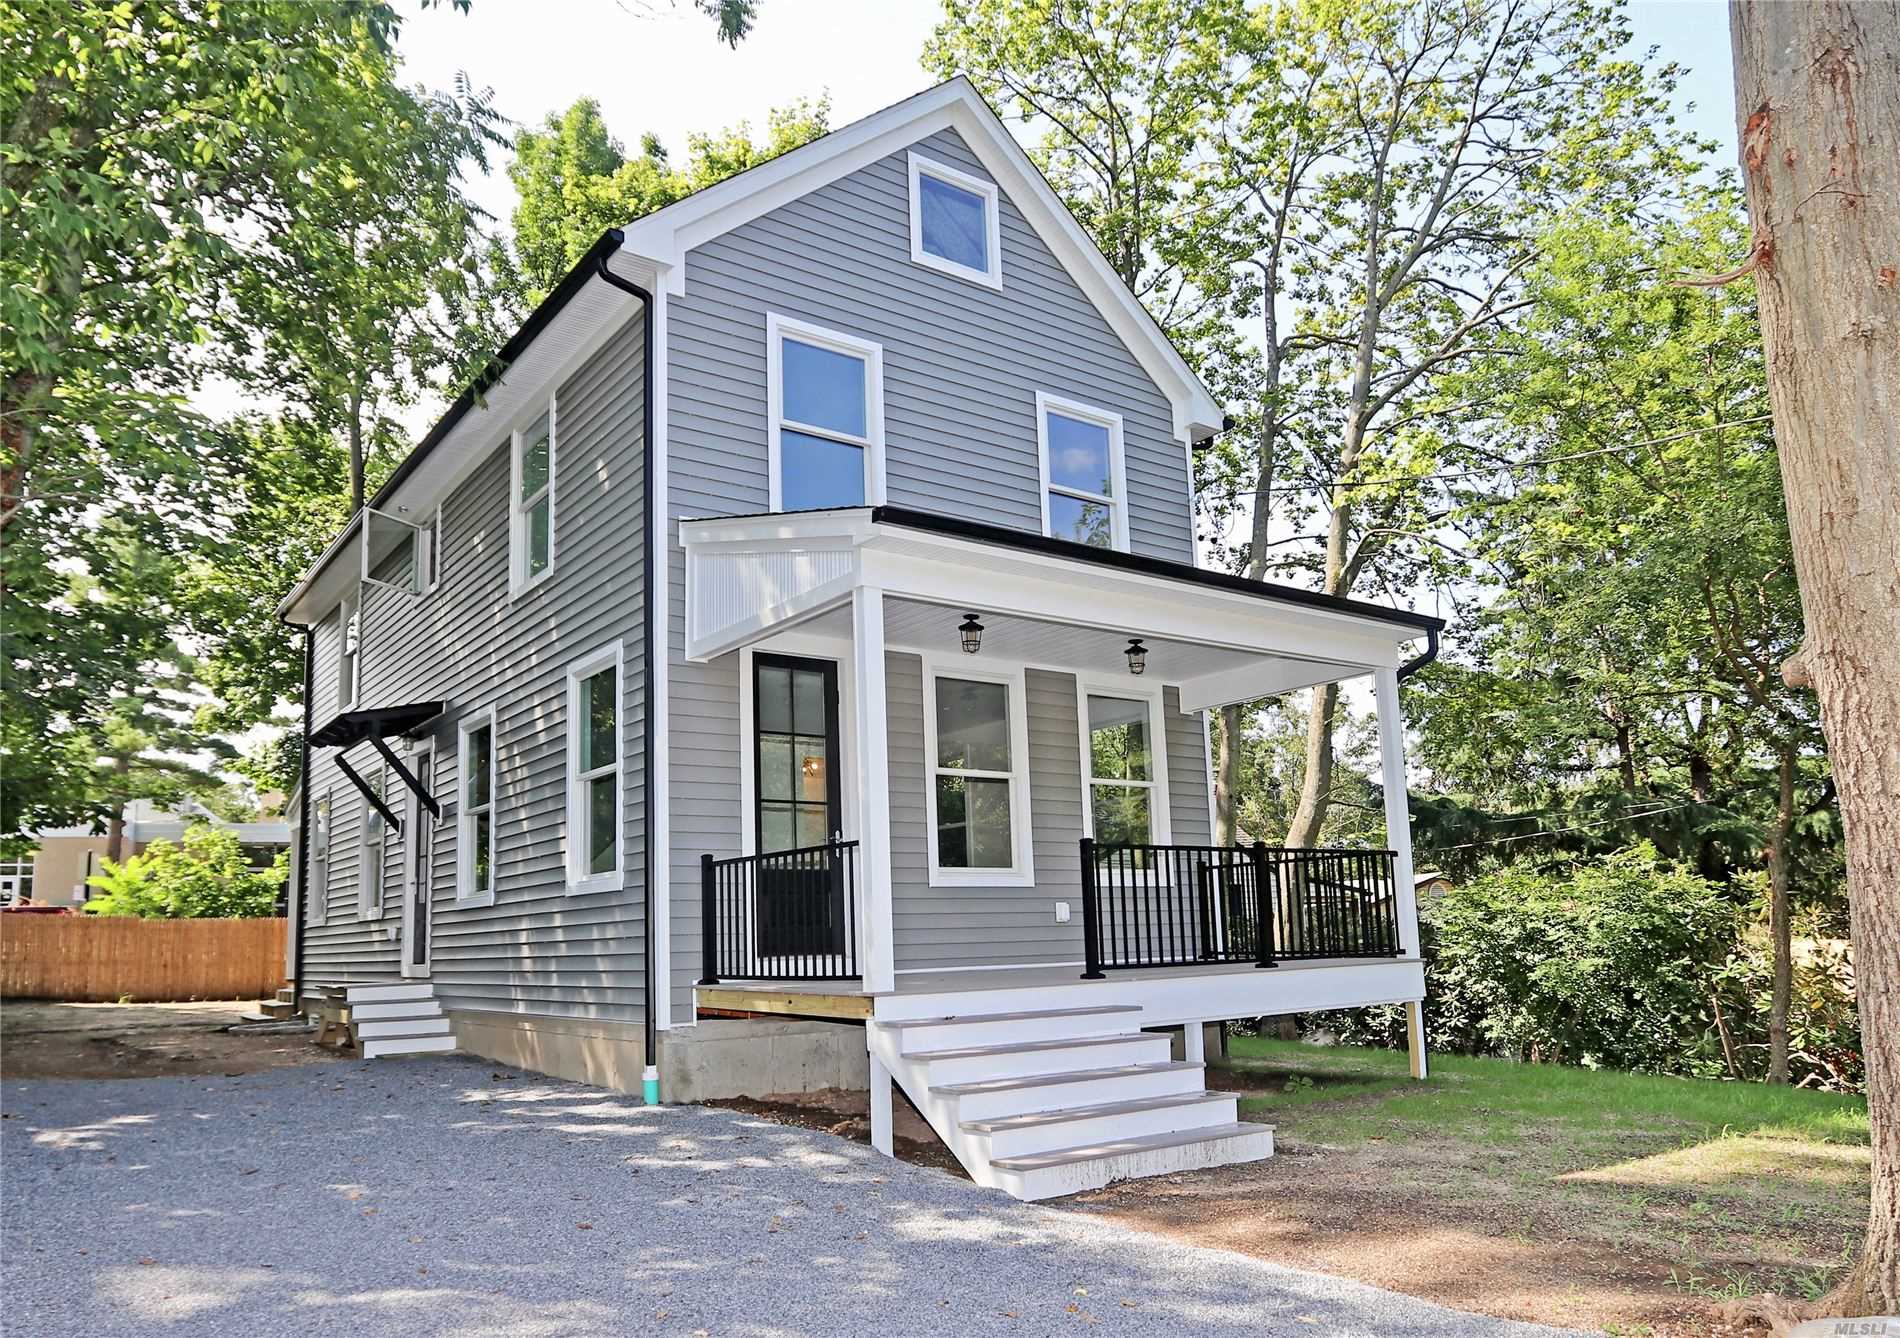 BRAND NEW 3 BR/3.5 Bth Colonial. Local contractor & architect combined talents to create this beautiful luxe home w/ oversized windows & white Oak fls throughout, and full finished bsmt w/ 8.5&rsquo; ceiling & outside entrance.With 9&rsquo; ceiling and open layout on the first floor including kitchen with breakfast bar, SS appliances, quartz counters & designer backsplash, this gorgeous home also features a Master Ste w/3 closets, + 2nd full bth & 2 BRs on the 2nd fl. Trex decks, nice yard, North Shore SD!